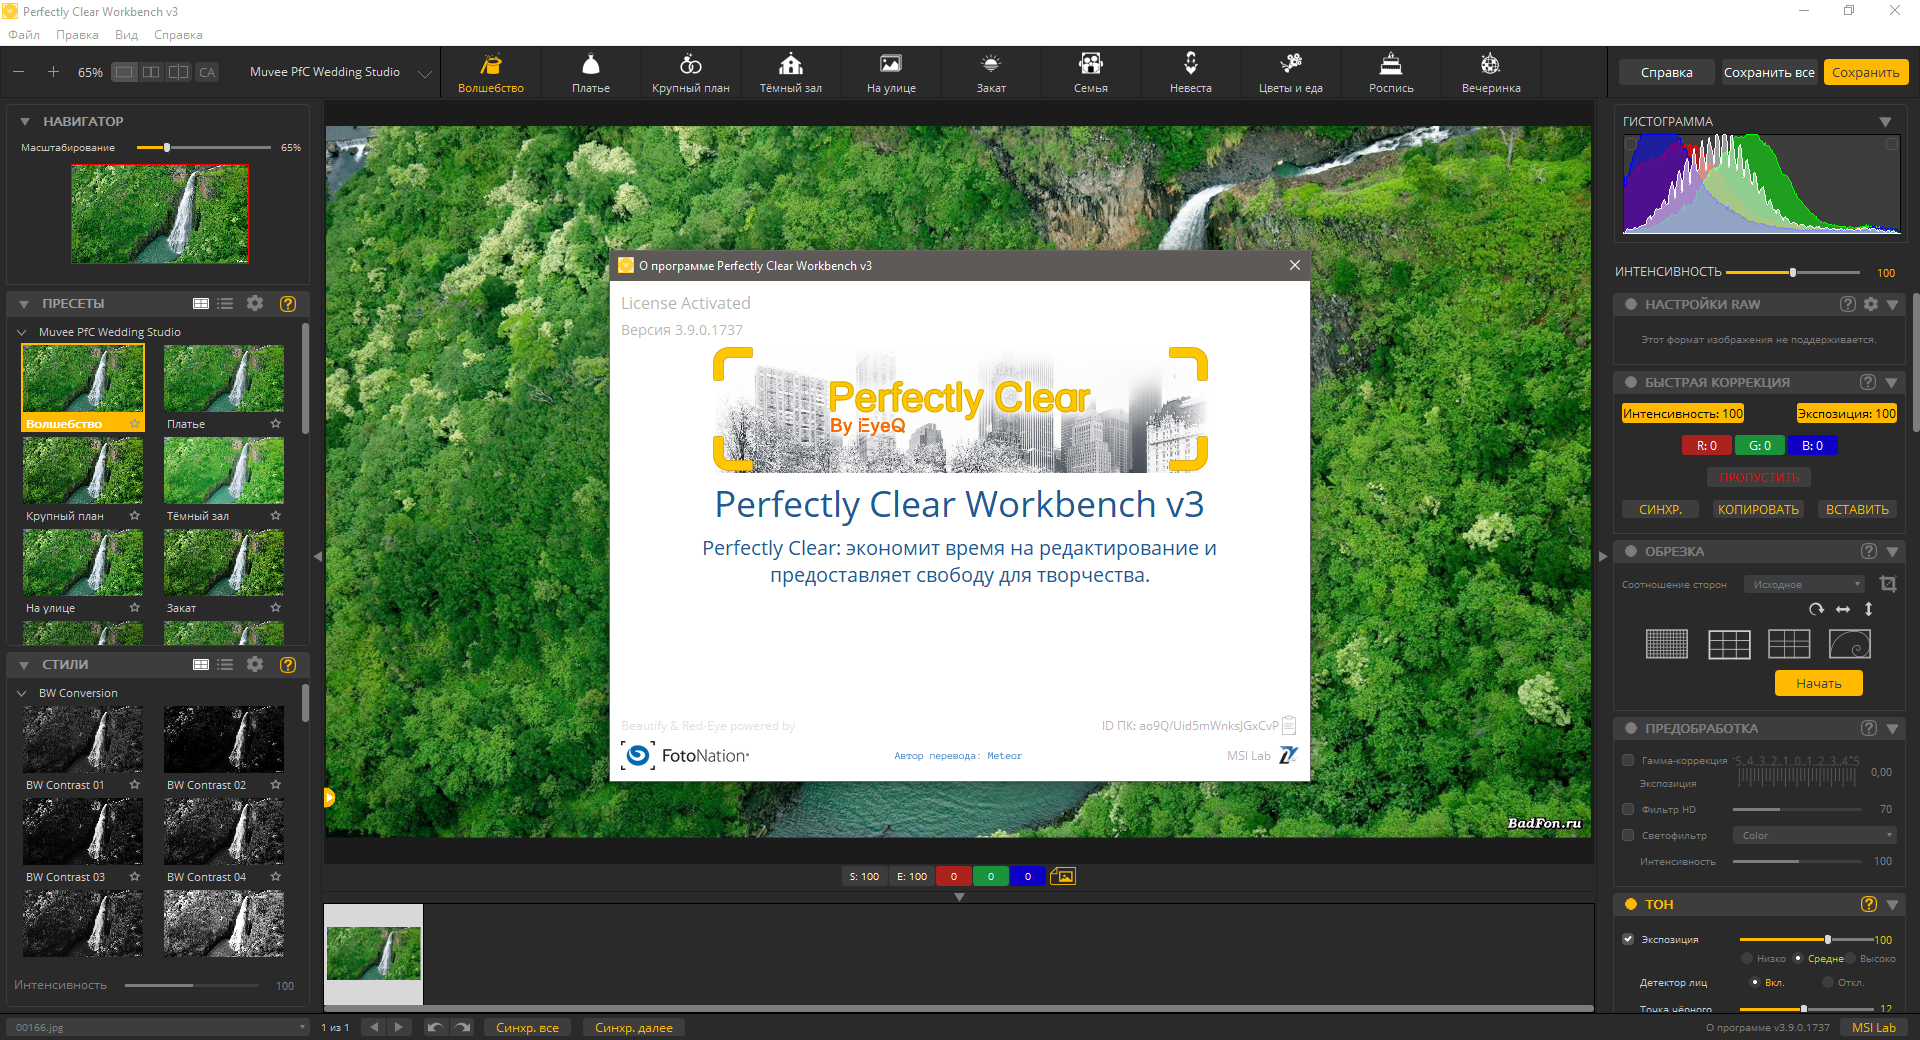 download the new for ios Perfectly Clear WorkBench